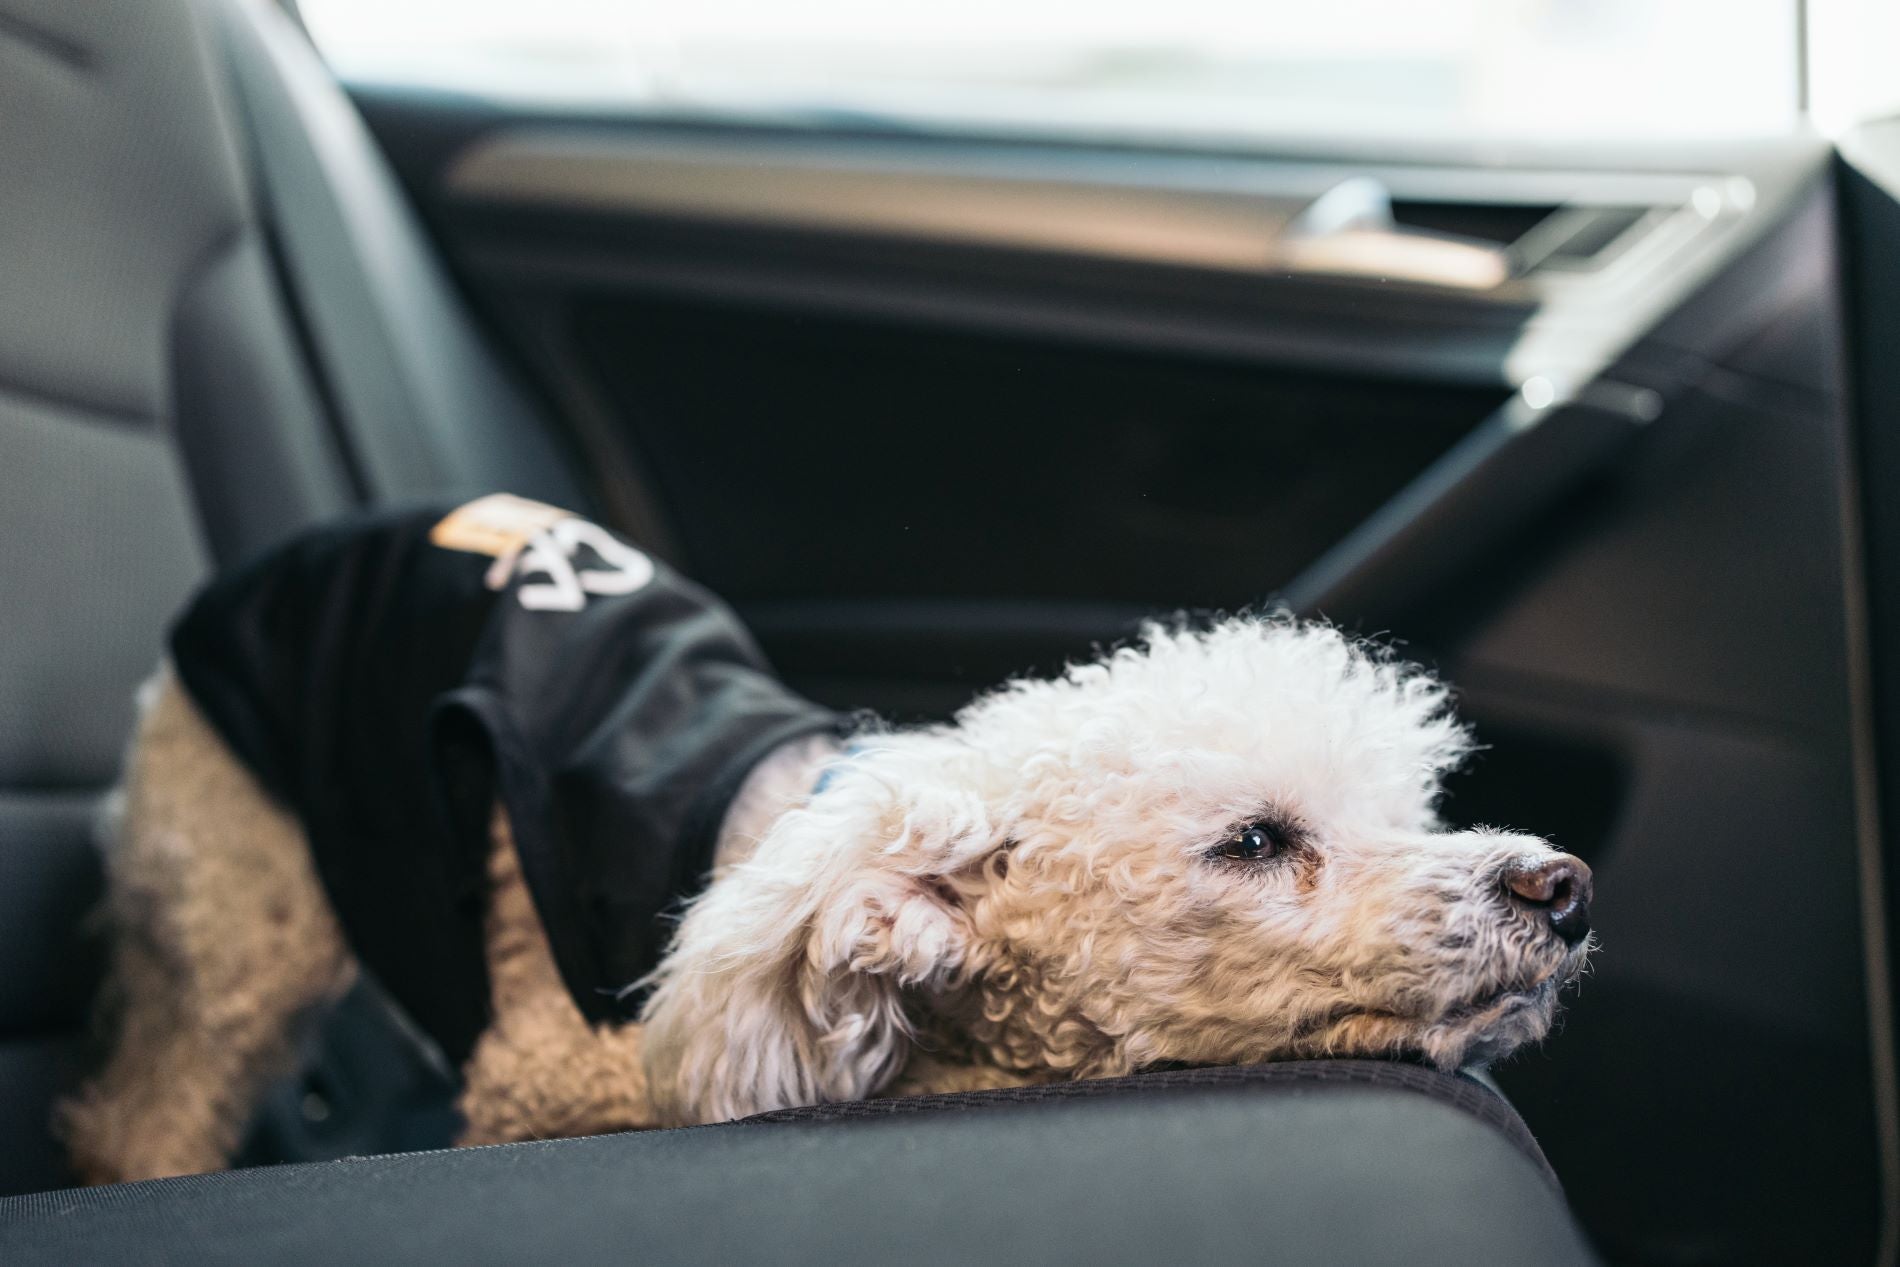 Dogs in car, shedding pet hair, all the pet hair, remove dog hair, remove pet hair, removing pet hair, embedded pet hair, removing dog hair, loose dog hair.